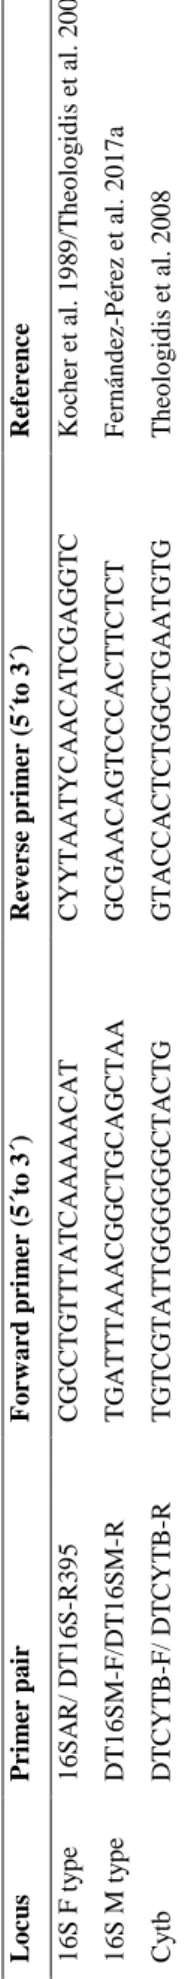 Table 2. PCR primers used to amplify fragments of 16S rDNA and Cytb from D. trunculus mtDNA